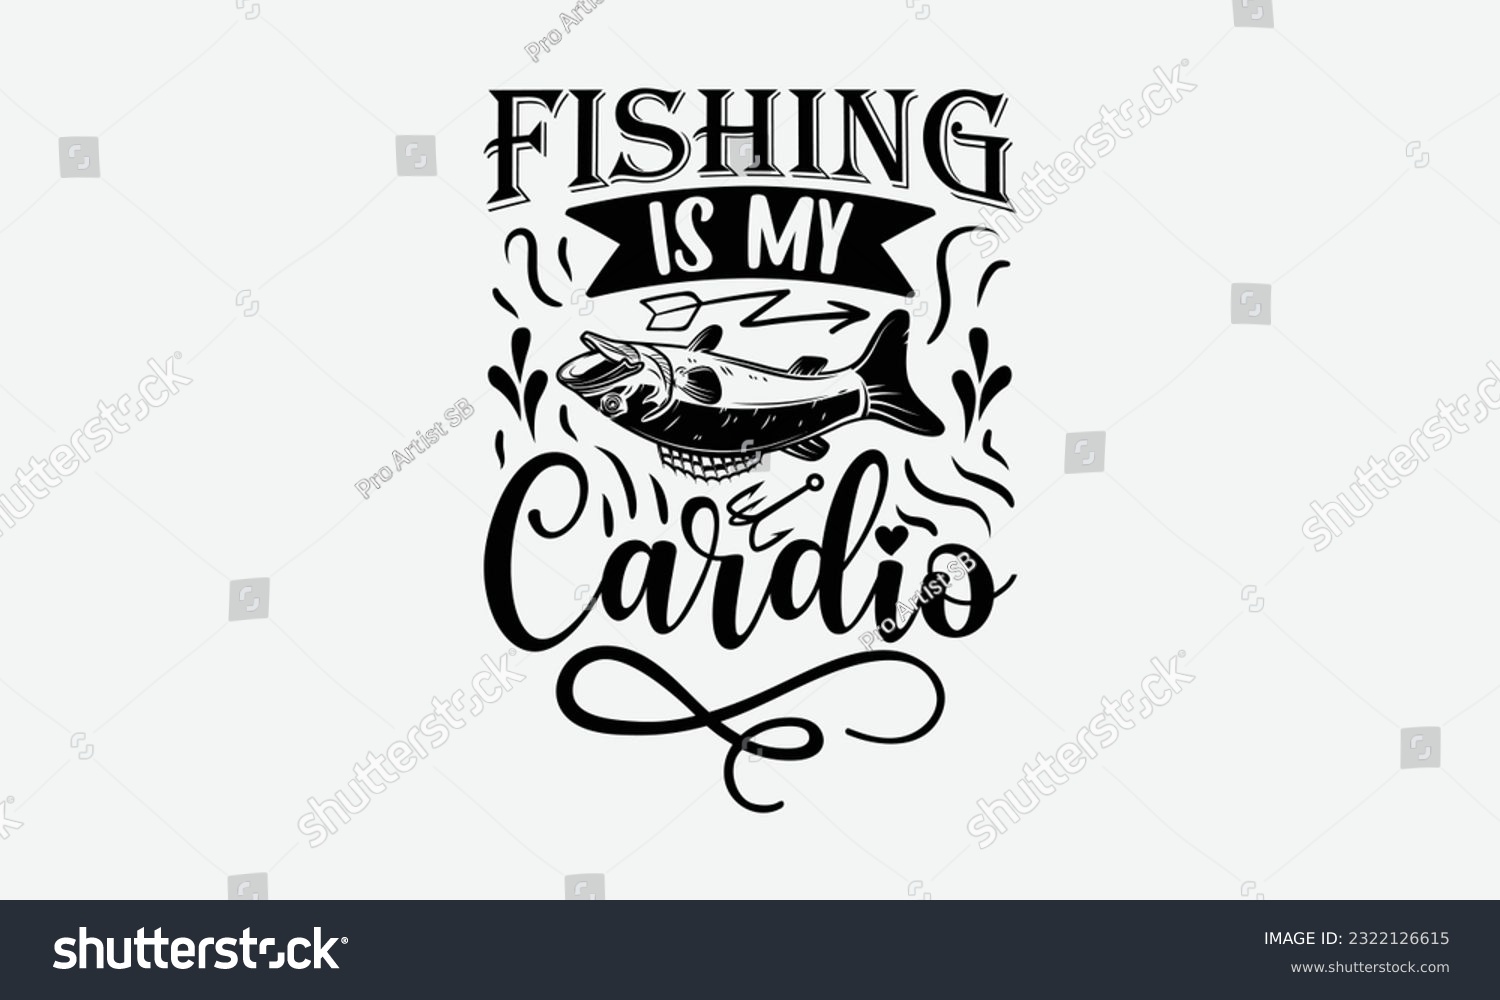 SVG of Fishing Is My Cardio - Fishing SVG Design, Fisherman Quotes, And Hand Written Vector T-Shirt Design, For Prints on Mugs and Bags, Posters. svg